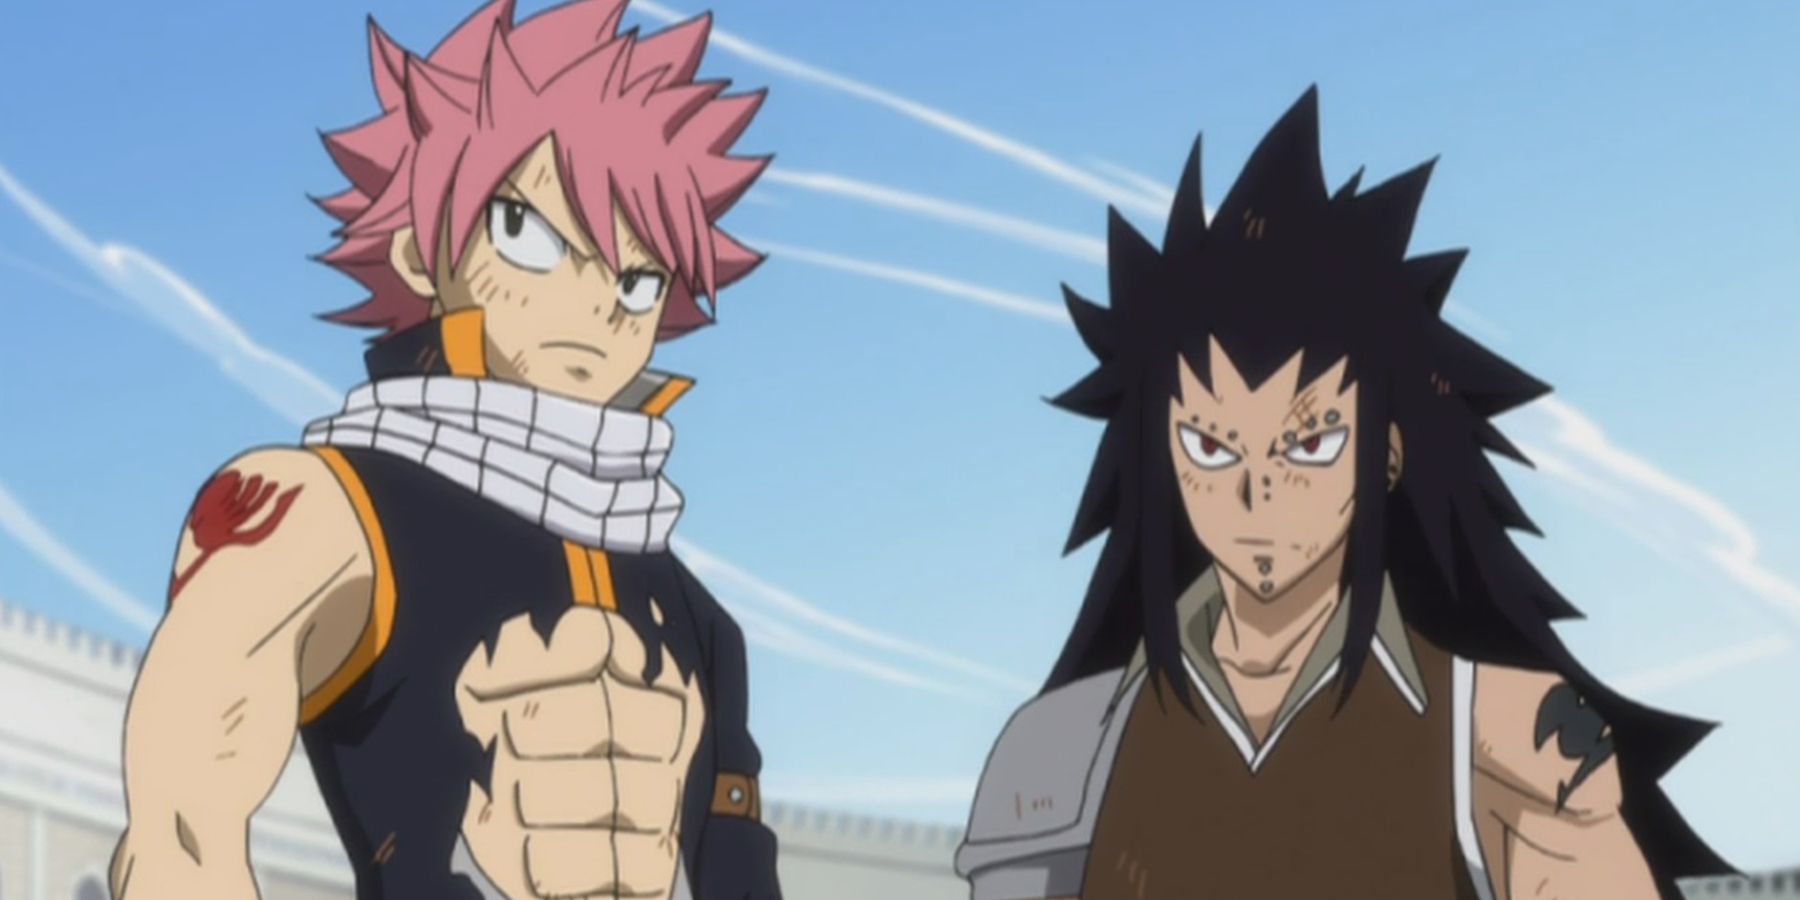 Natsu Dragneel and Gajeel Redfox during the events of Fairy Tail